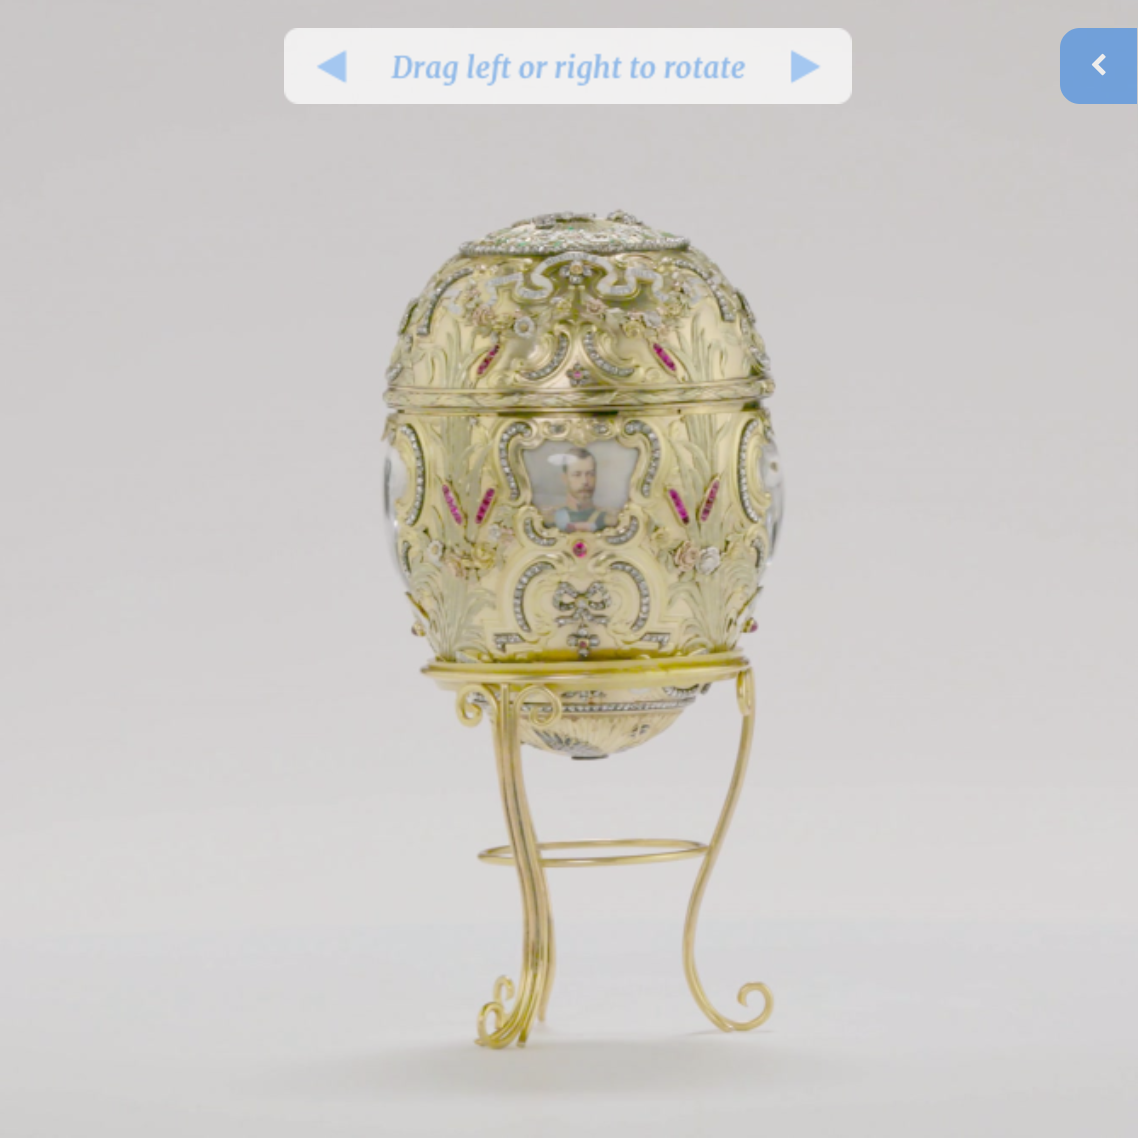 Imperial Peter the Great Egg from the Virginia Museum of Fine Arts Fabergé website.